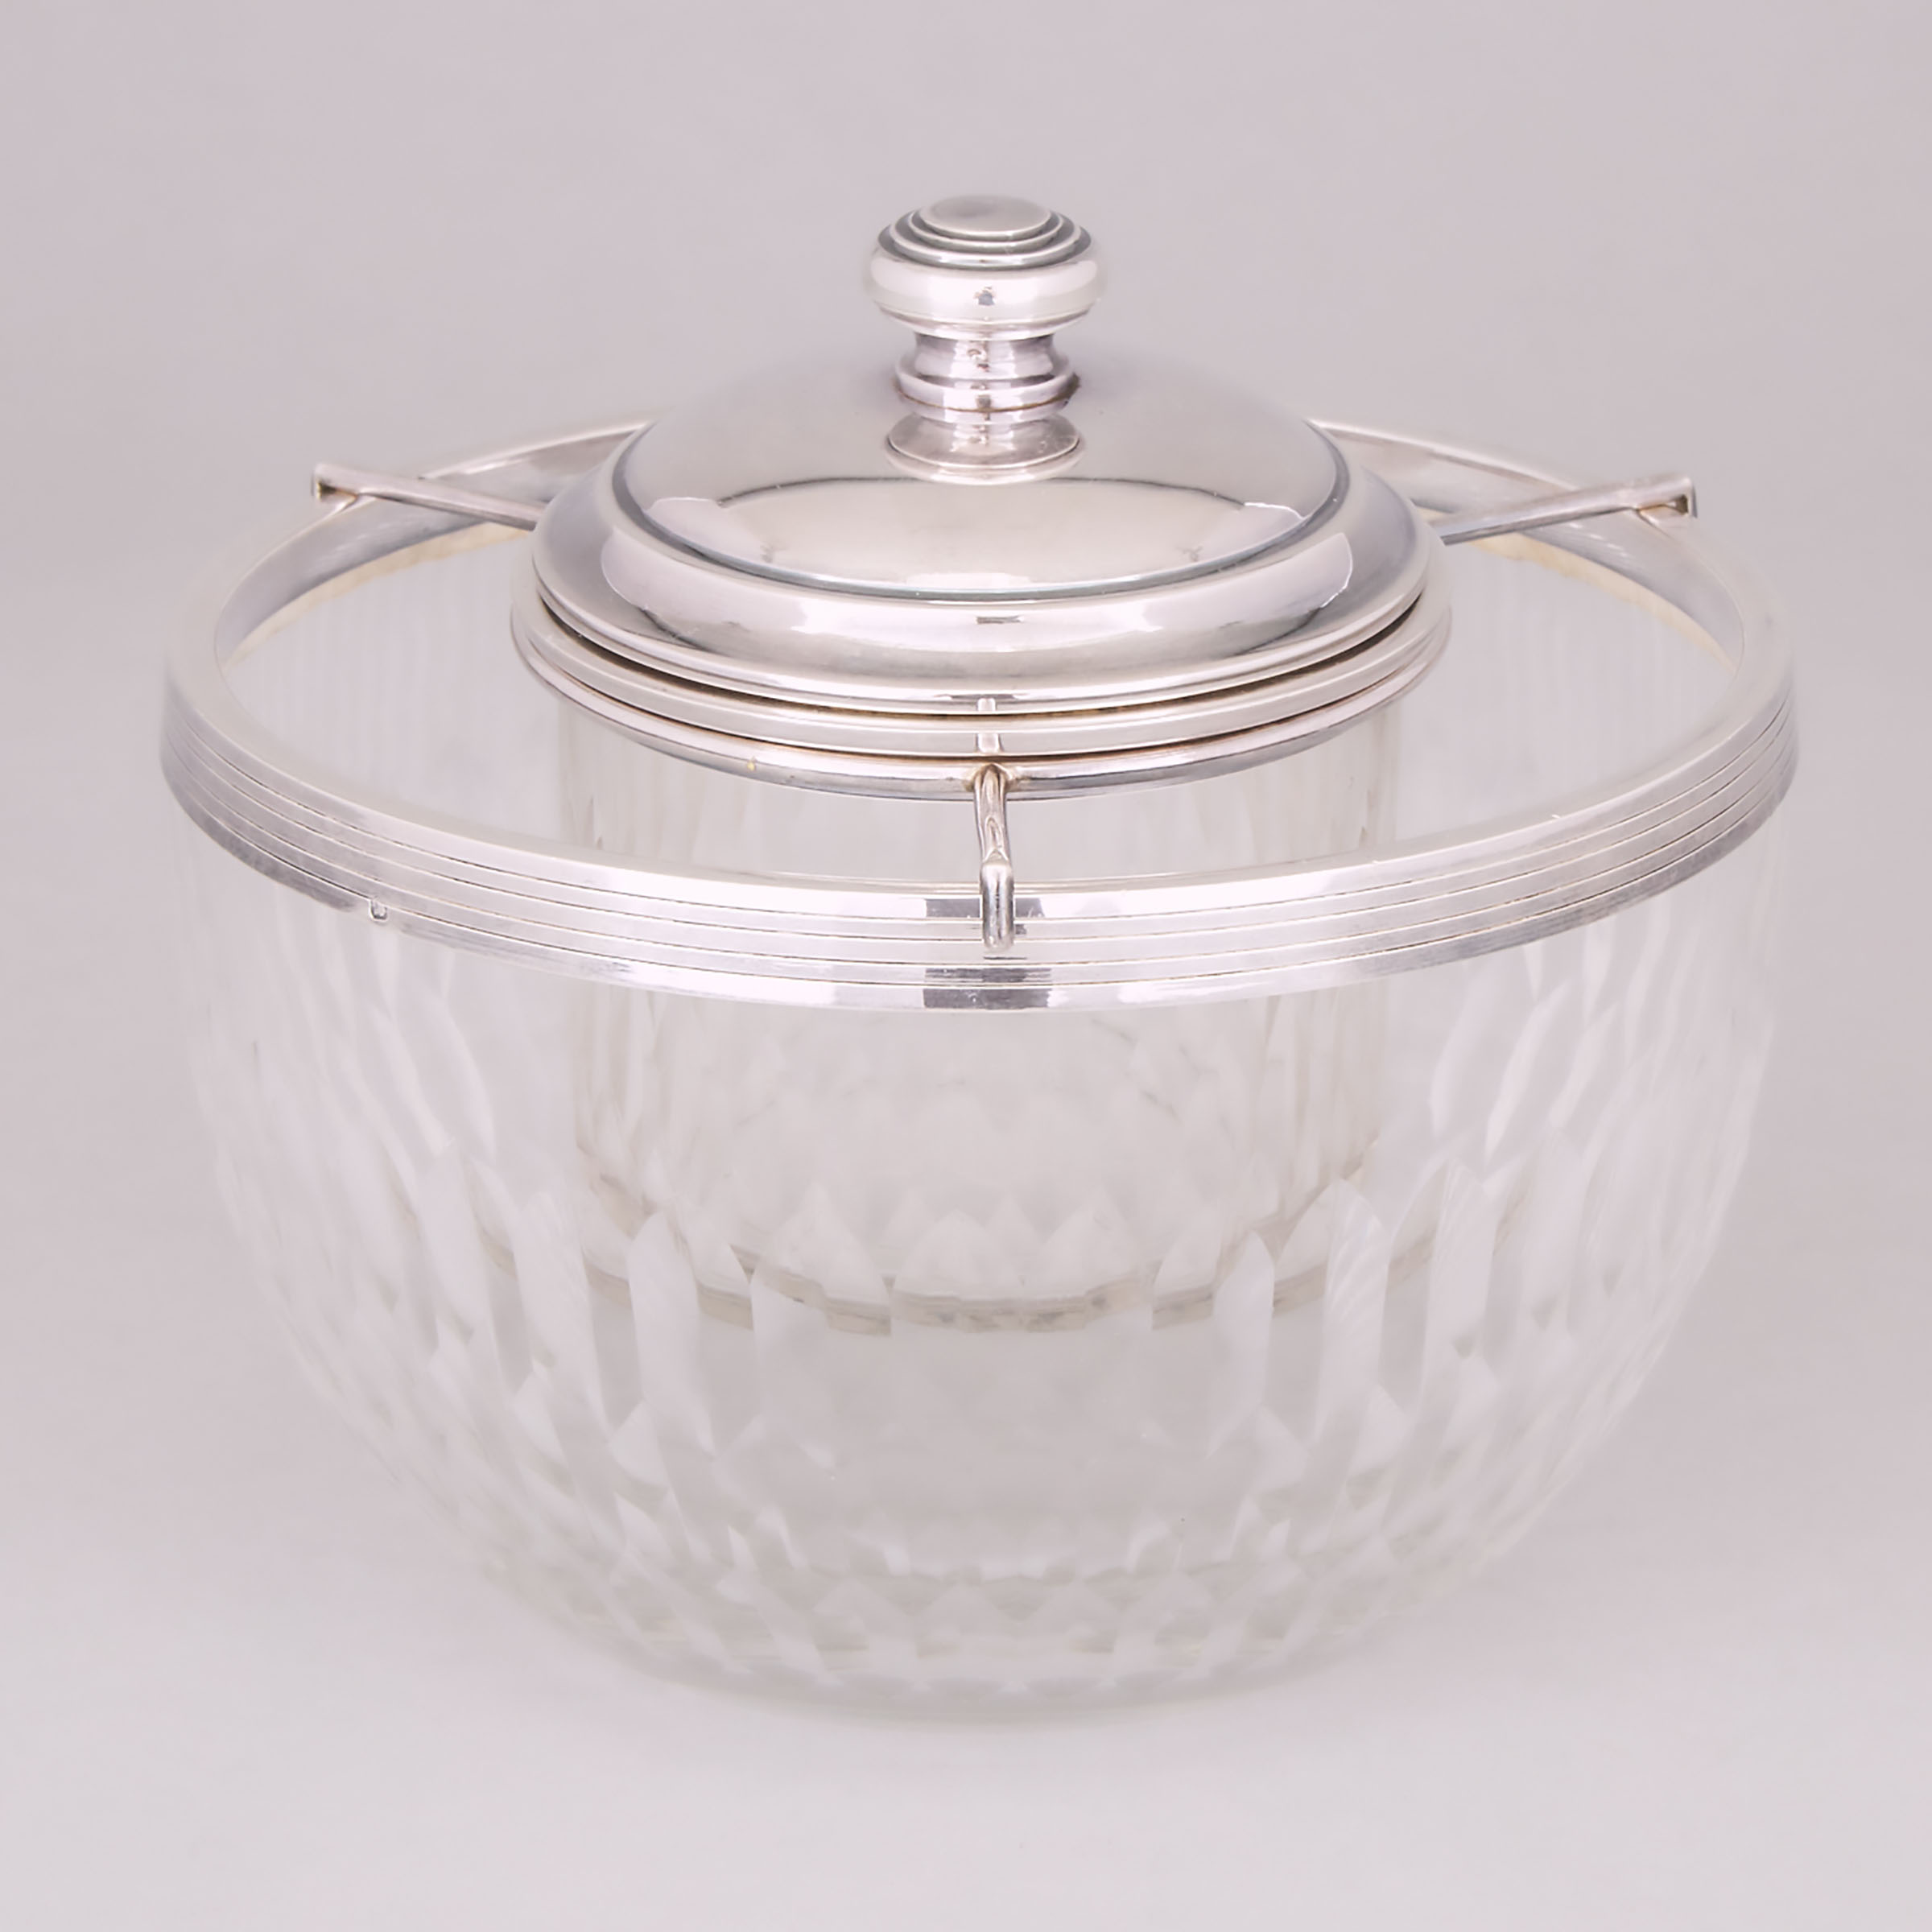 French Silver Mounted Cut Glass Caviar Dish, 20th century